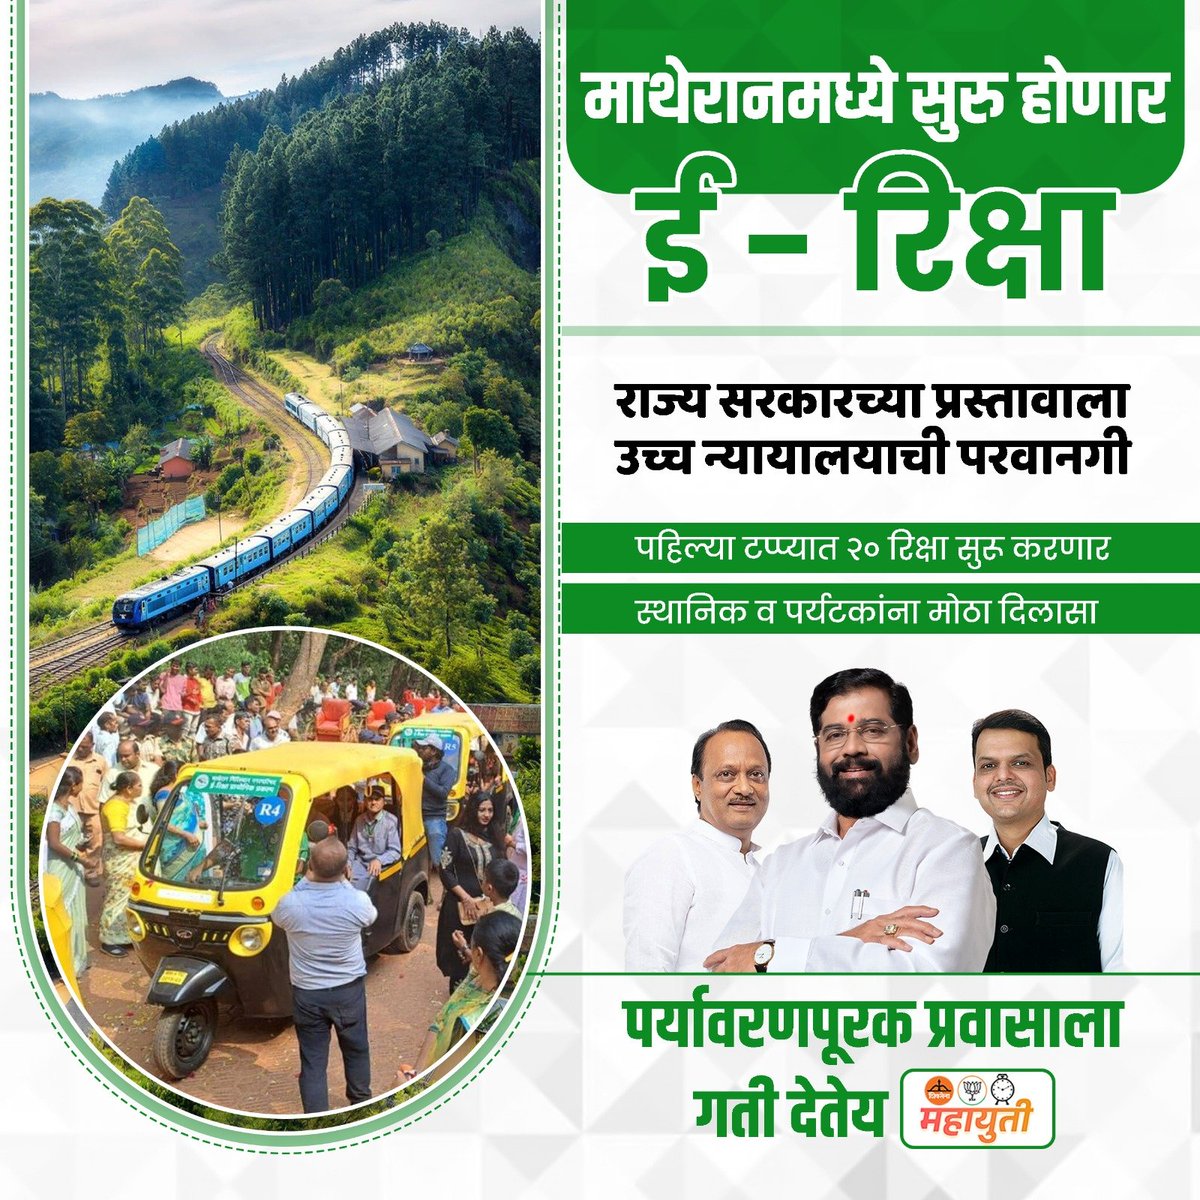 Hats off to the State Government and CM Eknath Shinde for making E-rickshaws a reality in Matheran! This move will not only reduce pollution but also ease traffic congestion, making it a win for both the environment and the people.